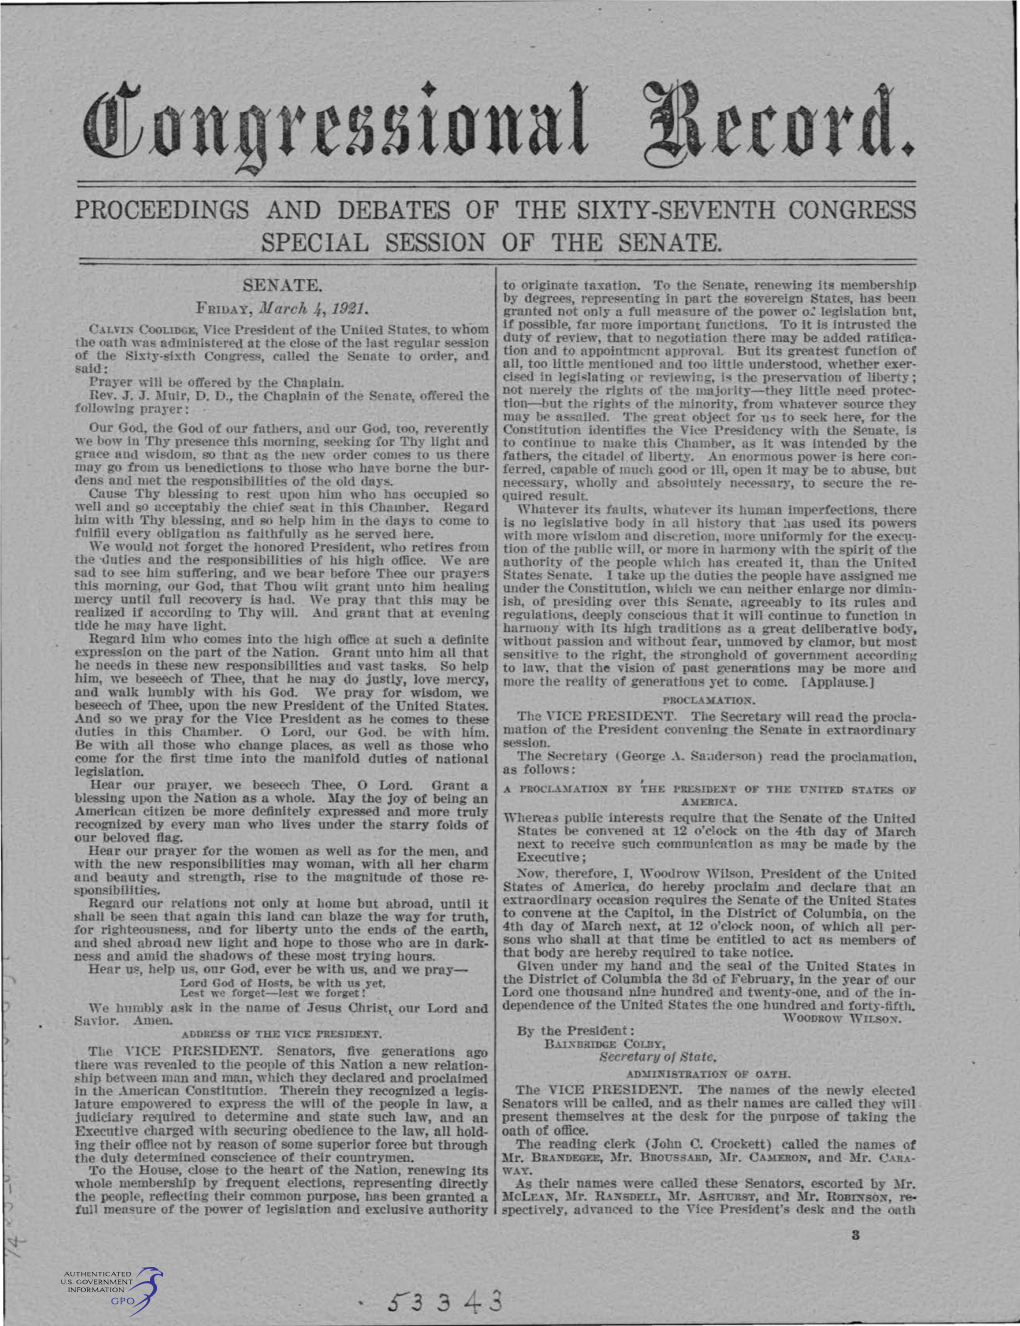 Or Ngrt!Isinnal Jrrnrd. PROCEEDINGS and DEBATES of the SIXTY-SEVENTH CONGRESS SPECIAL SESSION of the SENATE